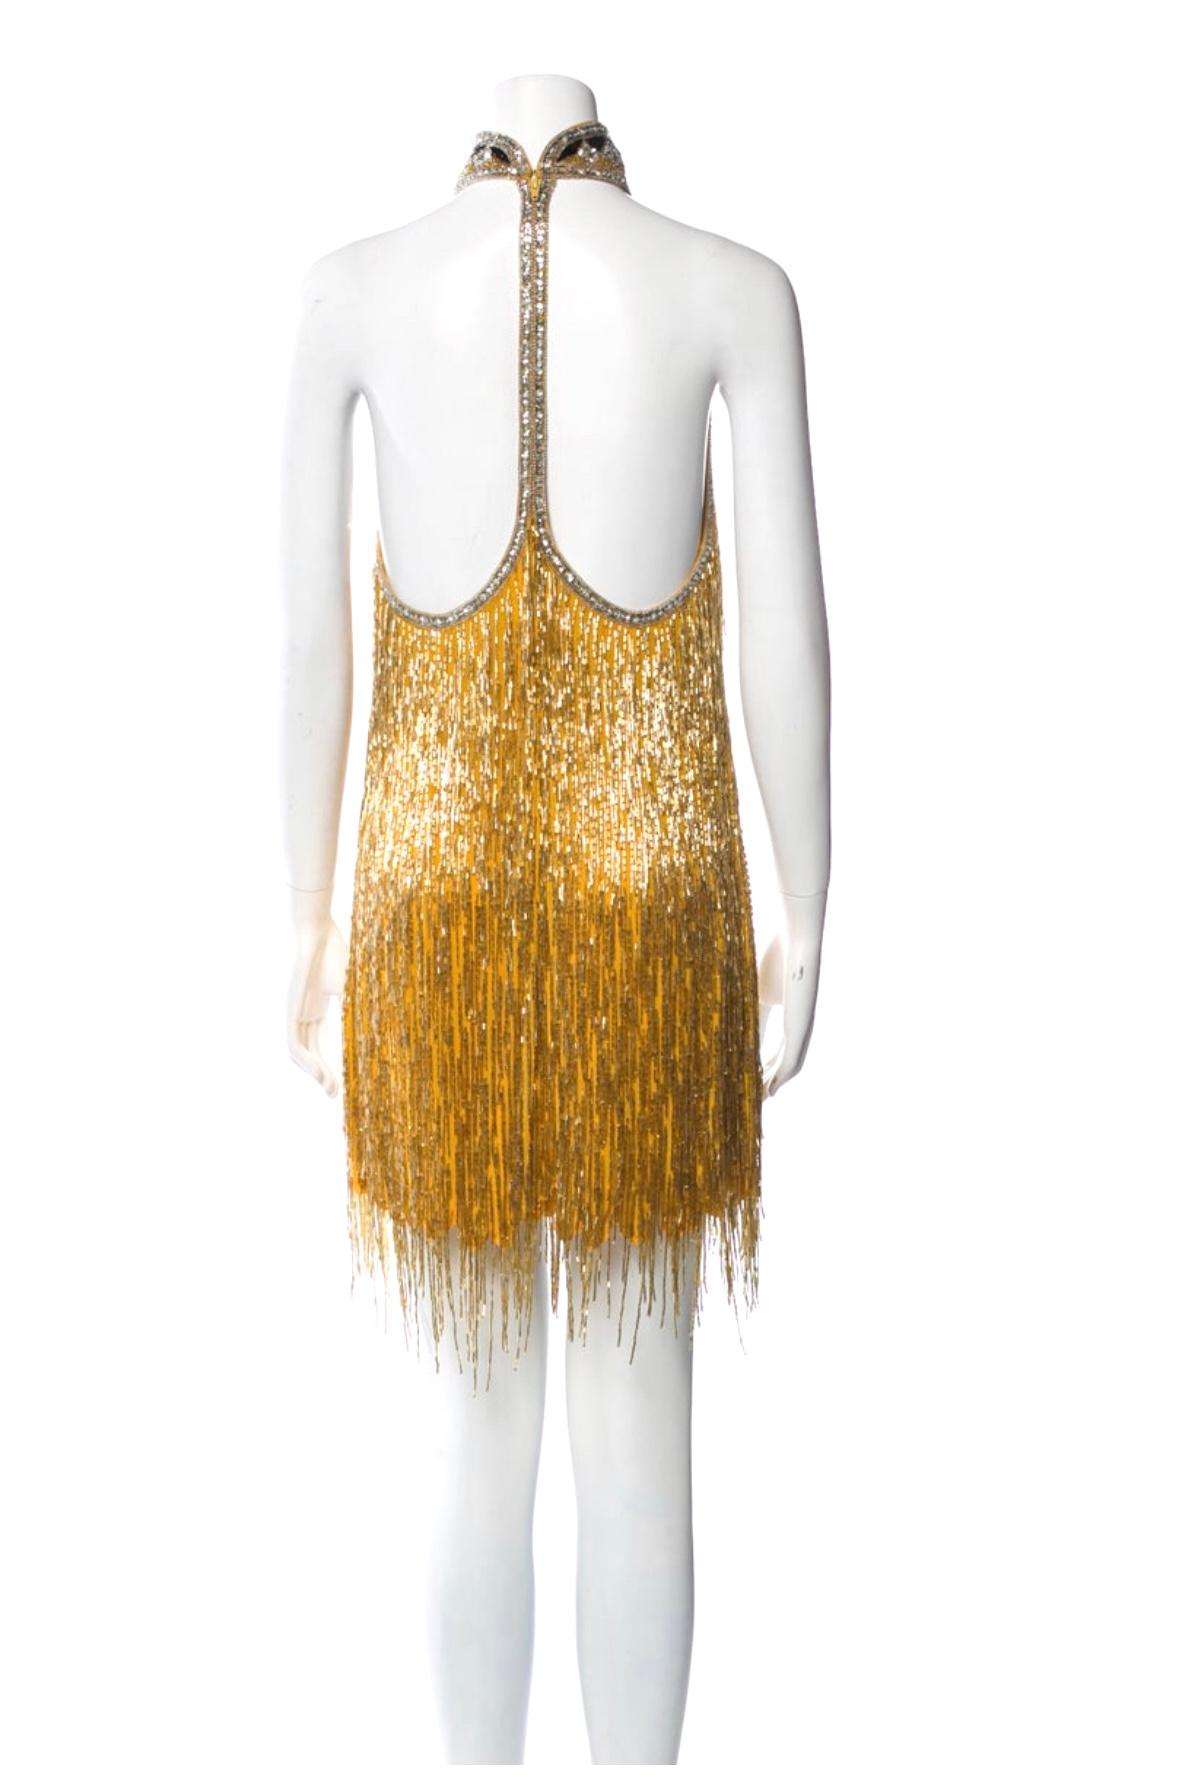 Bob Mackie silk dress with beading and sequins

open T back
31